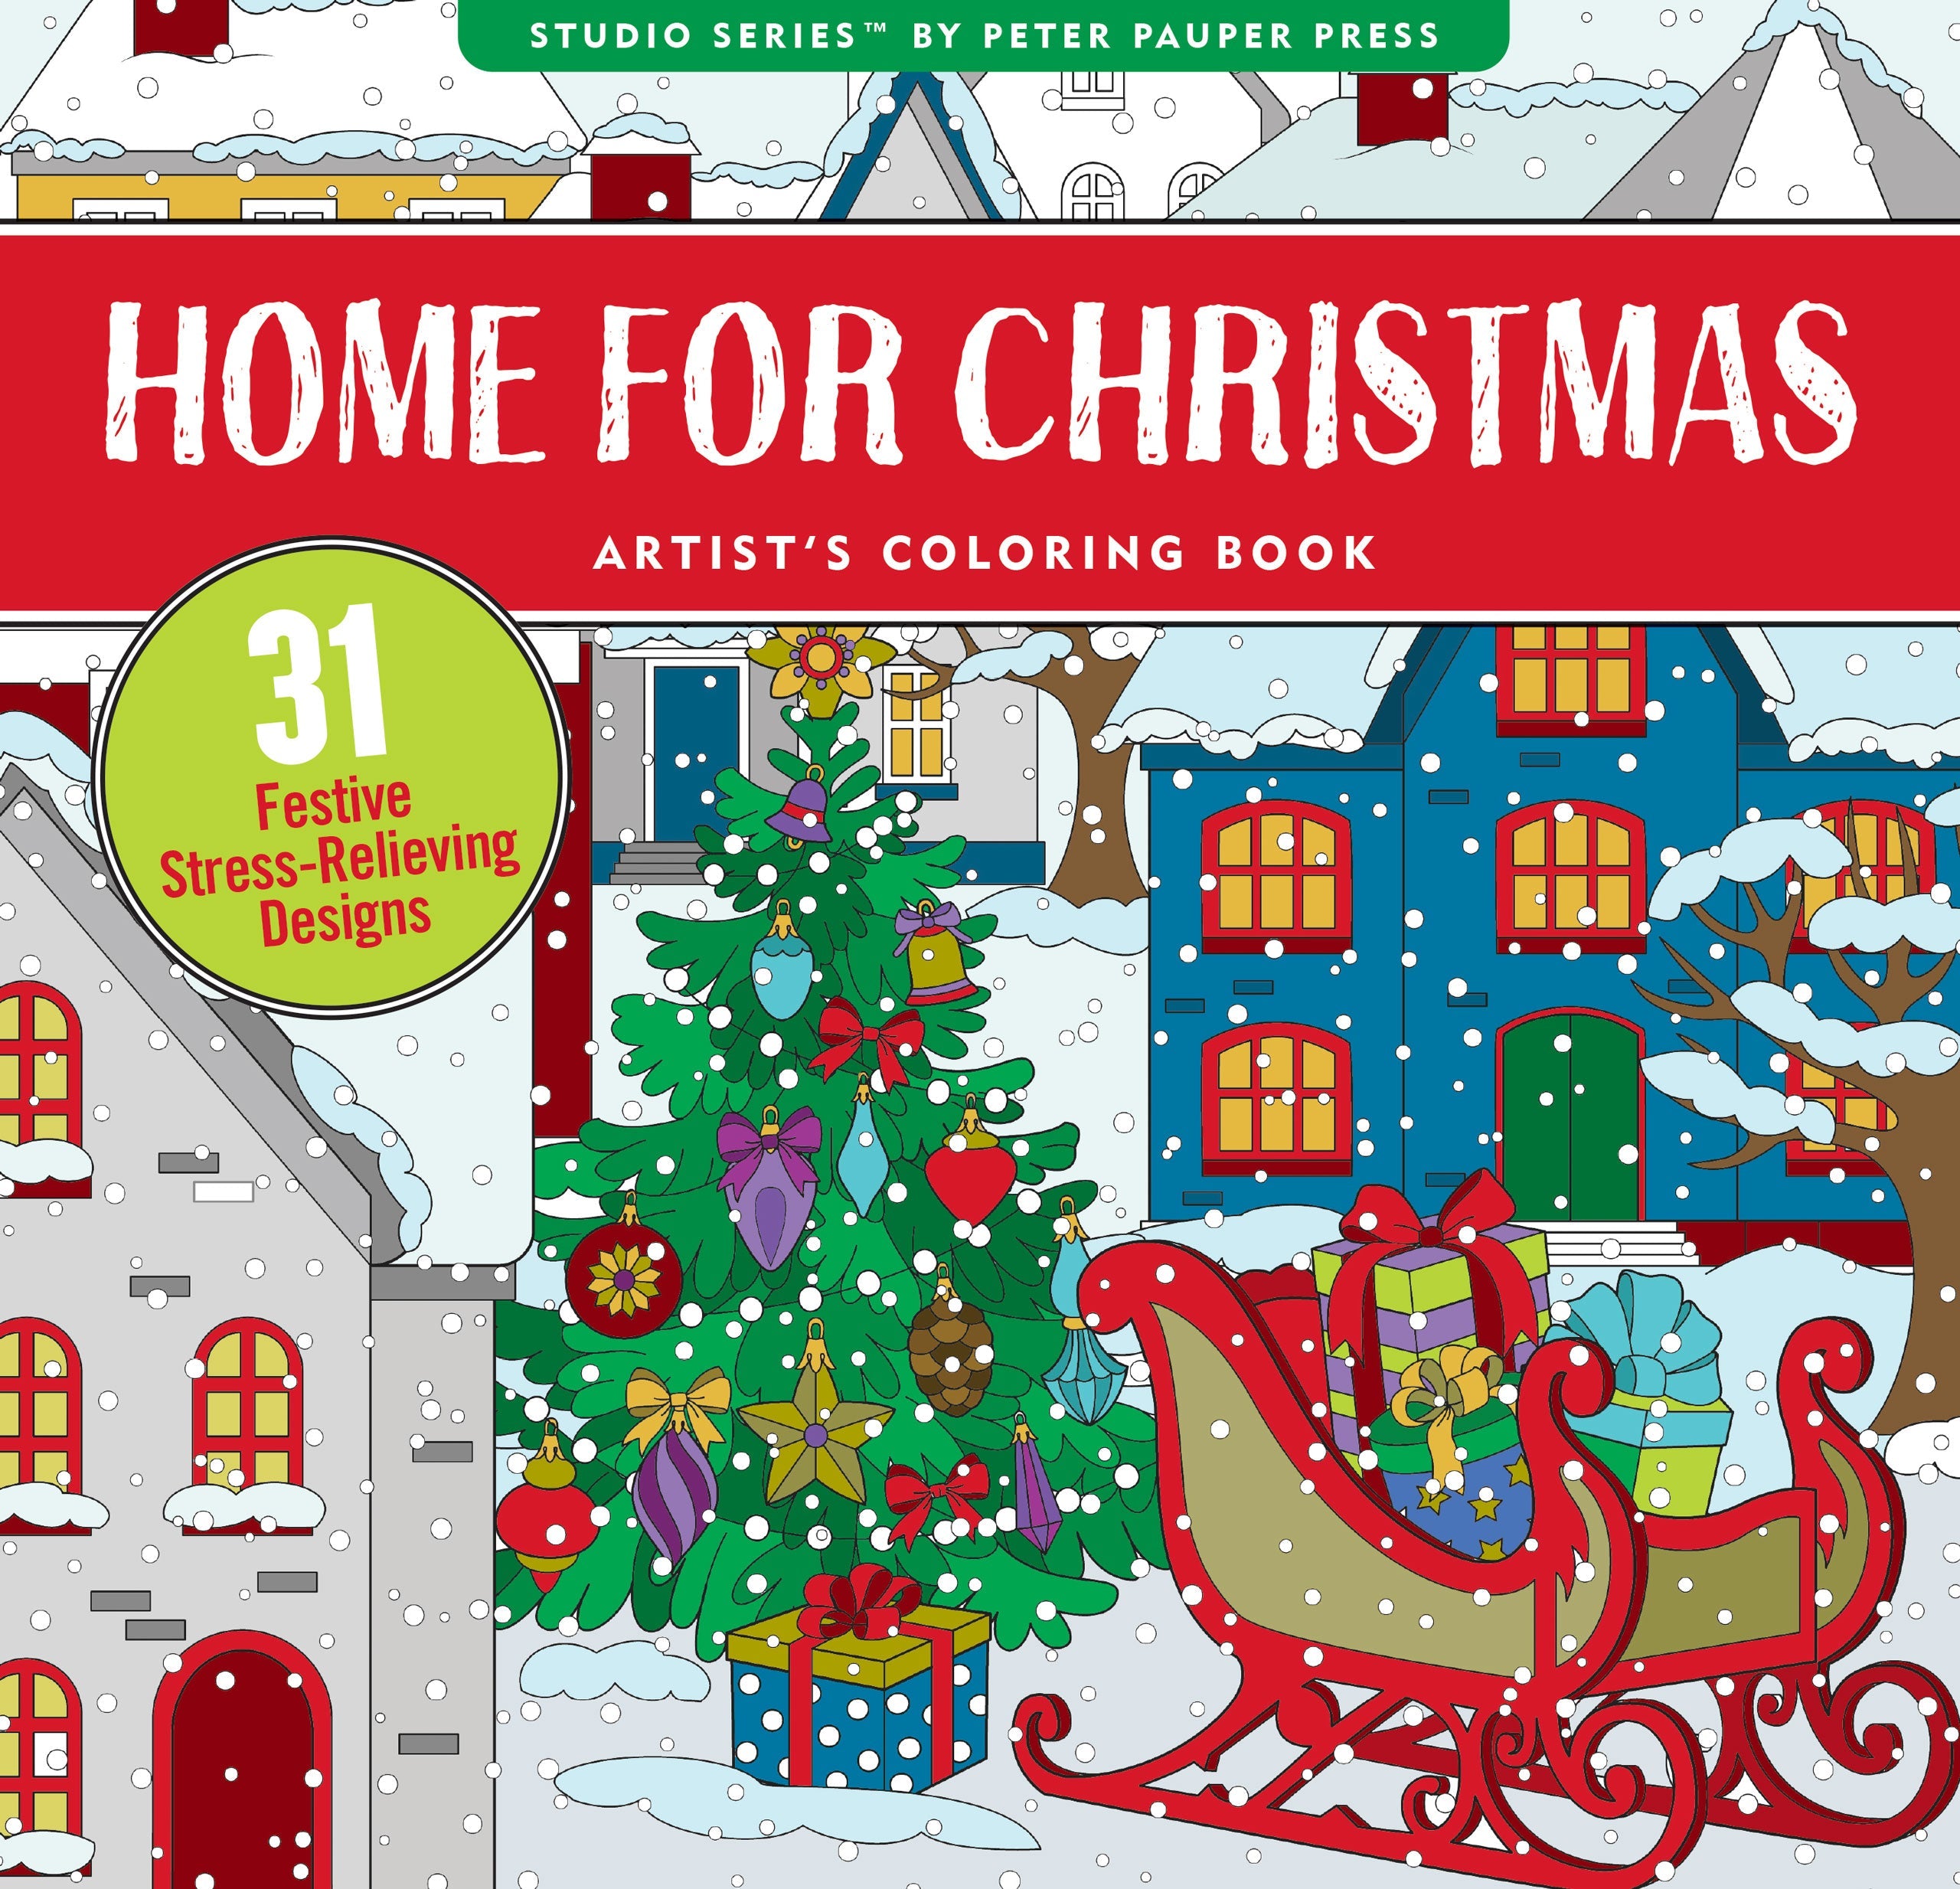 Home for Christmas Coloring Book – Peter Pauper Press